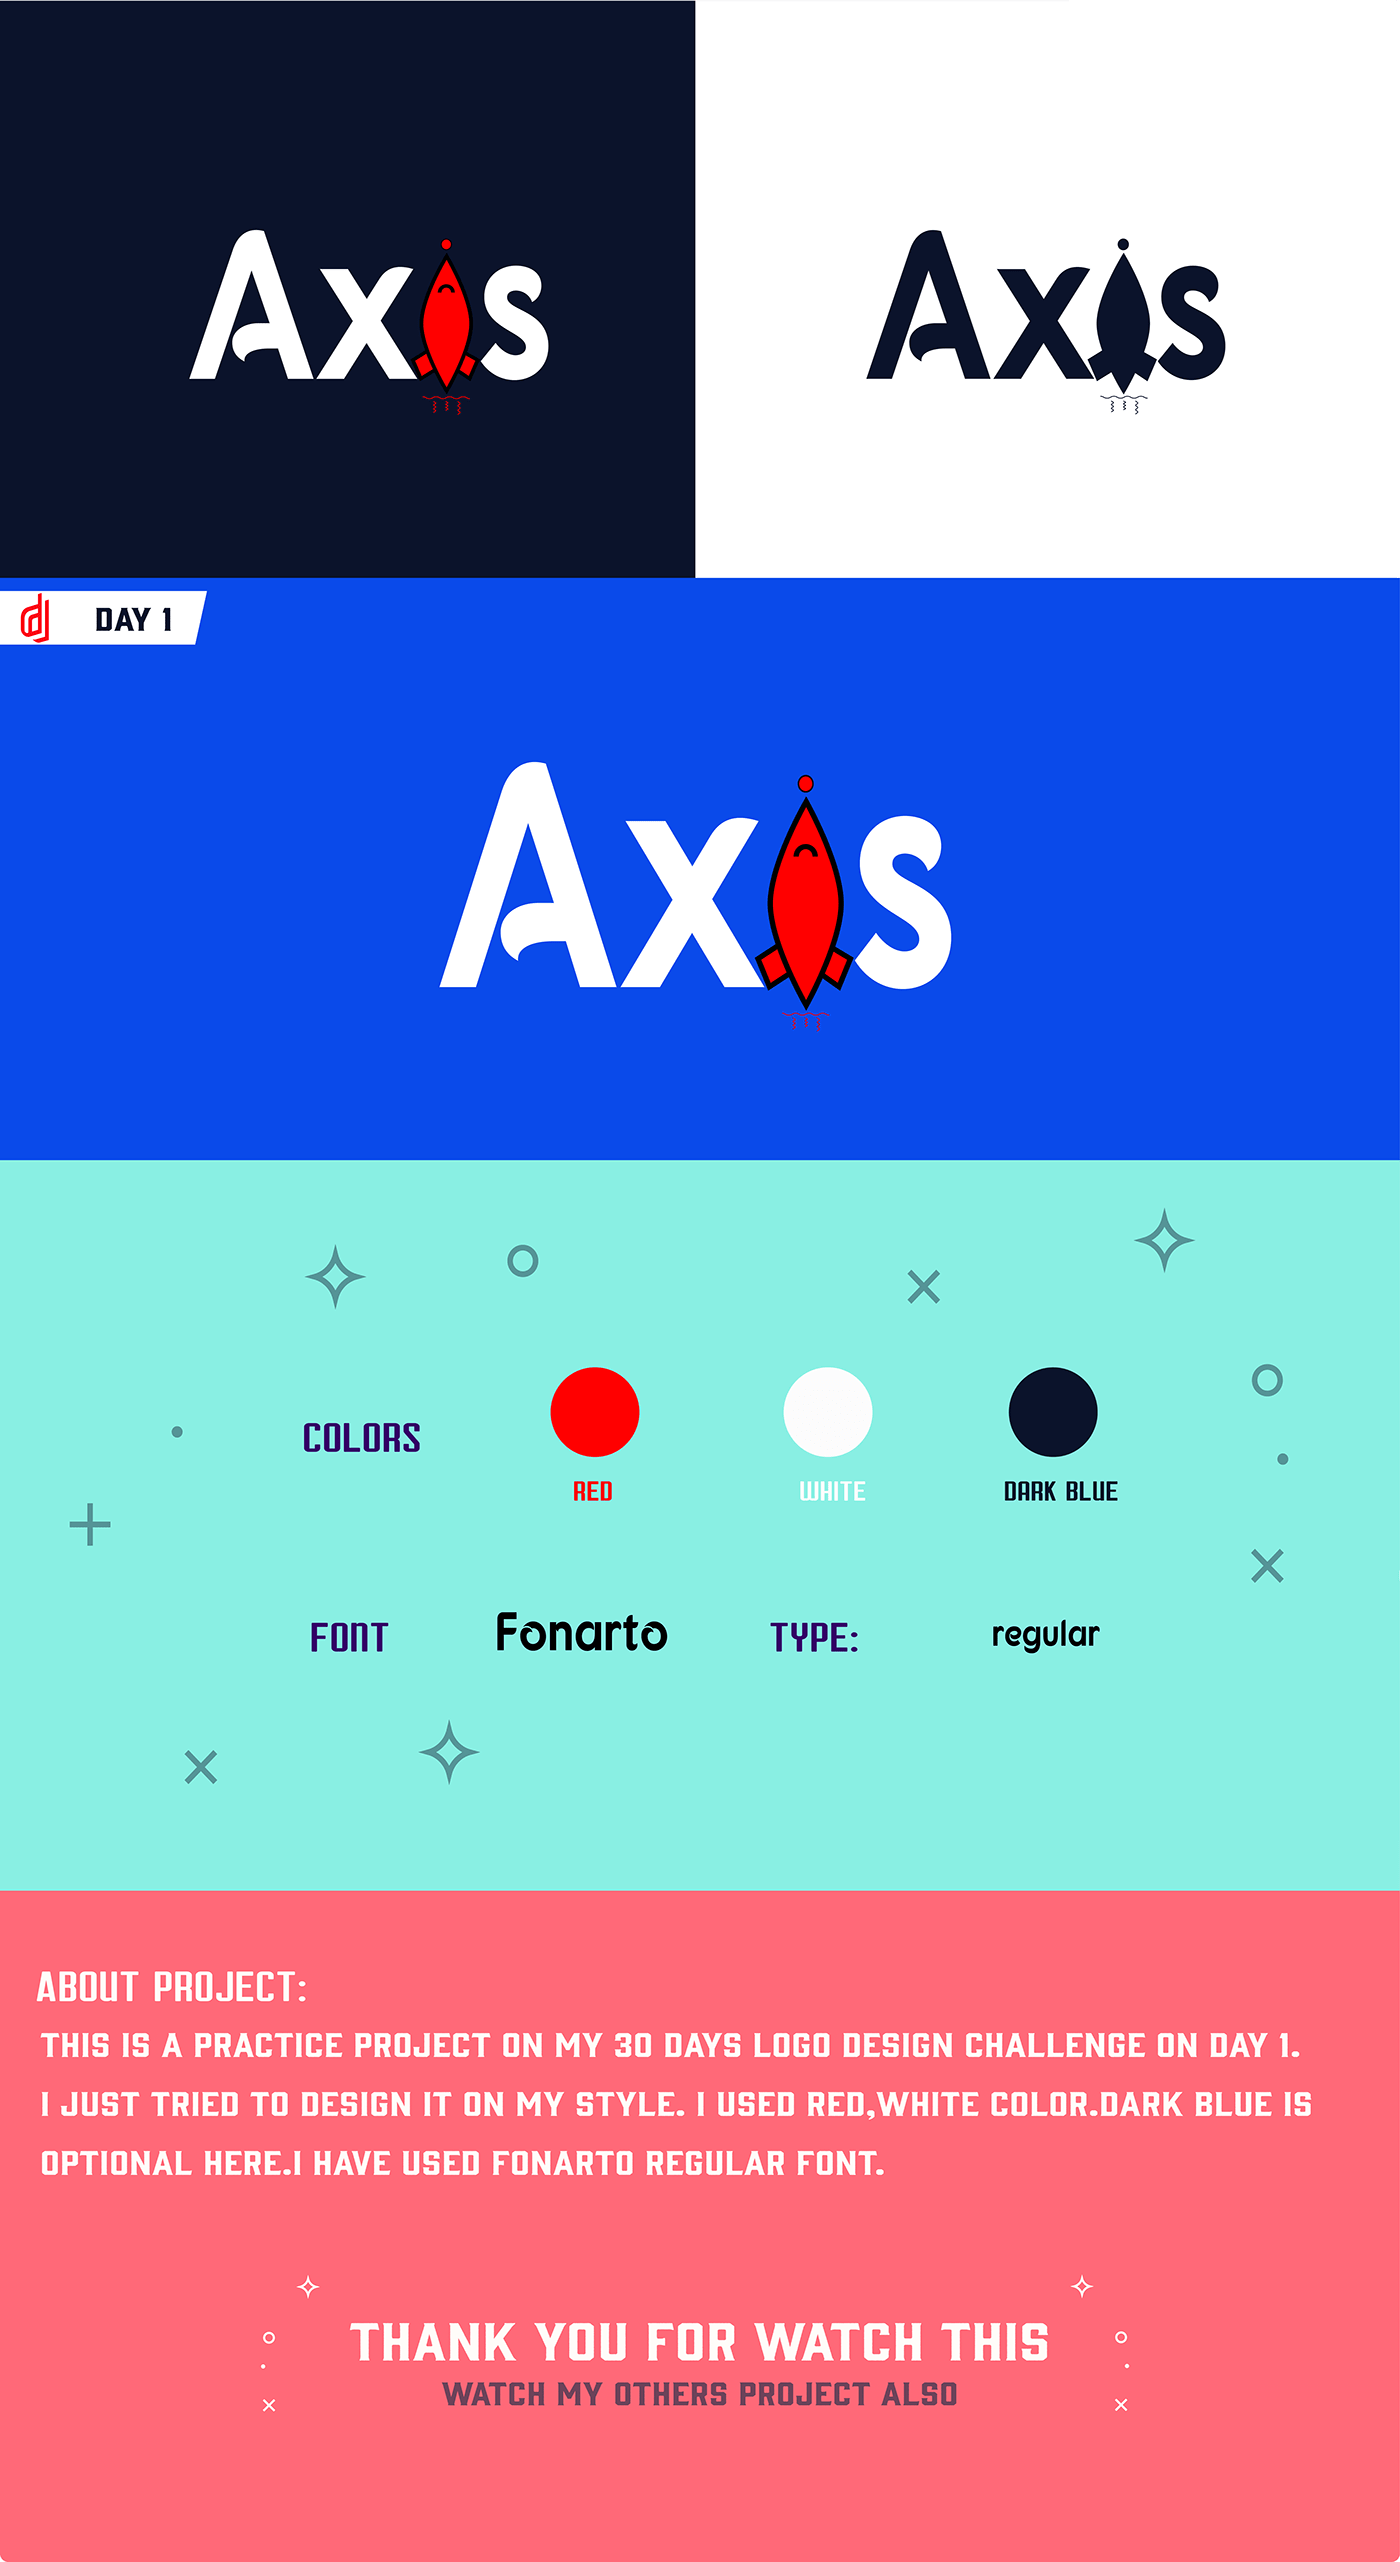 Axis logo design challenge on day 1